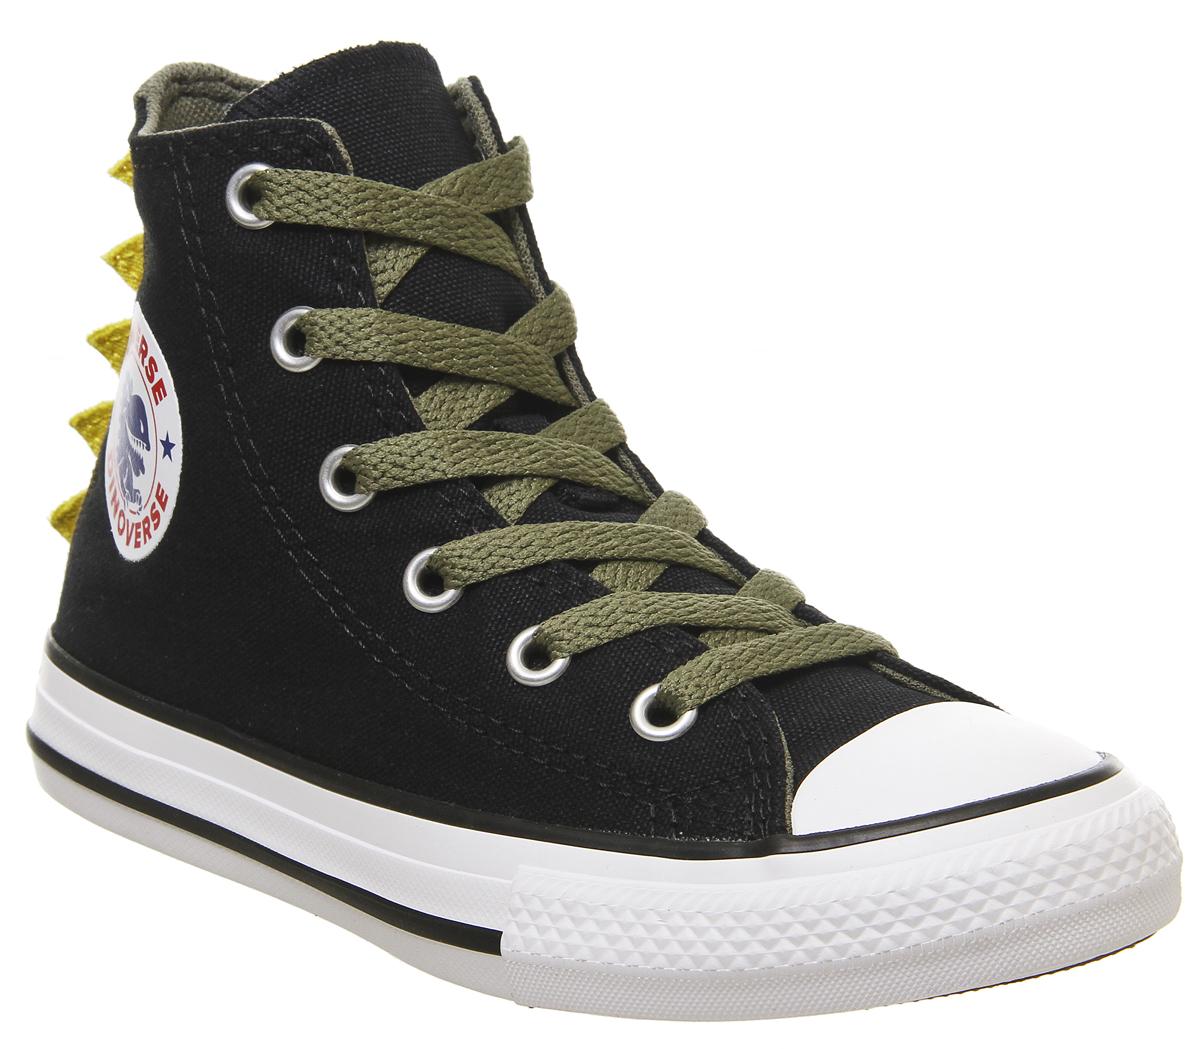 Converse All Star Hi Mid Sizes Trainers 